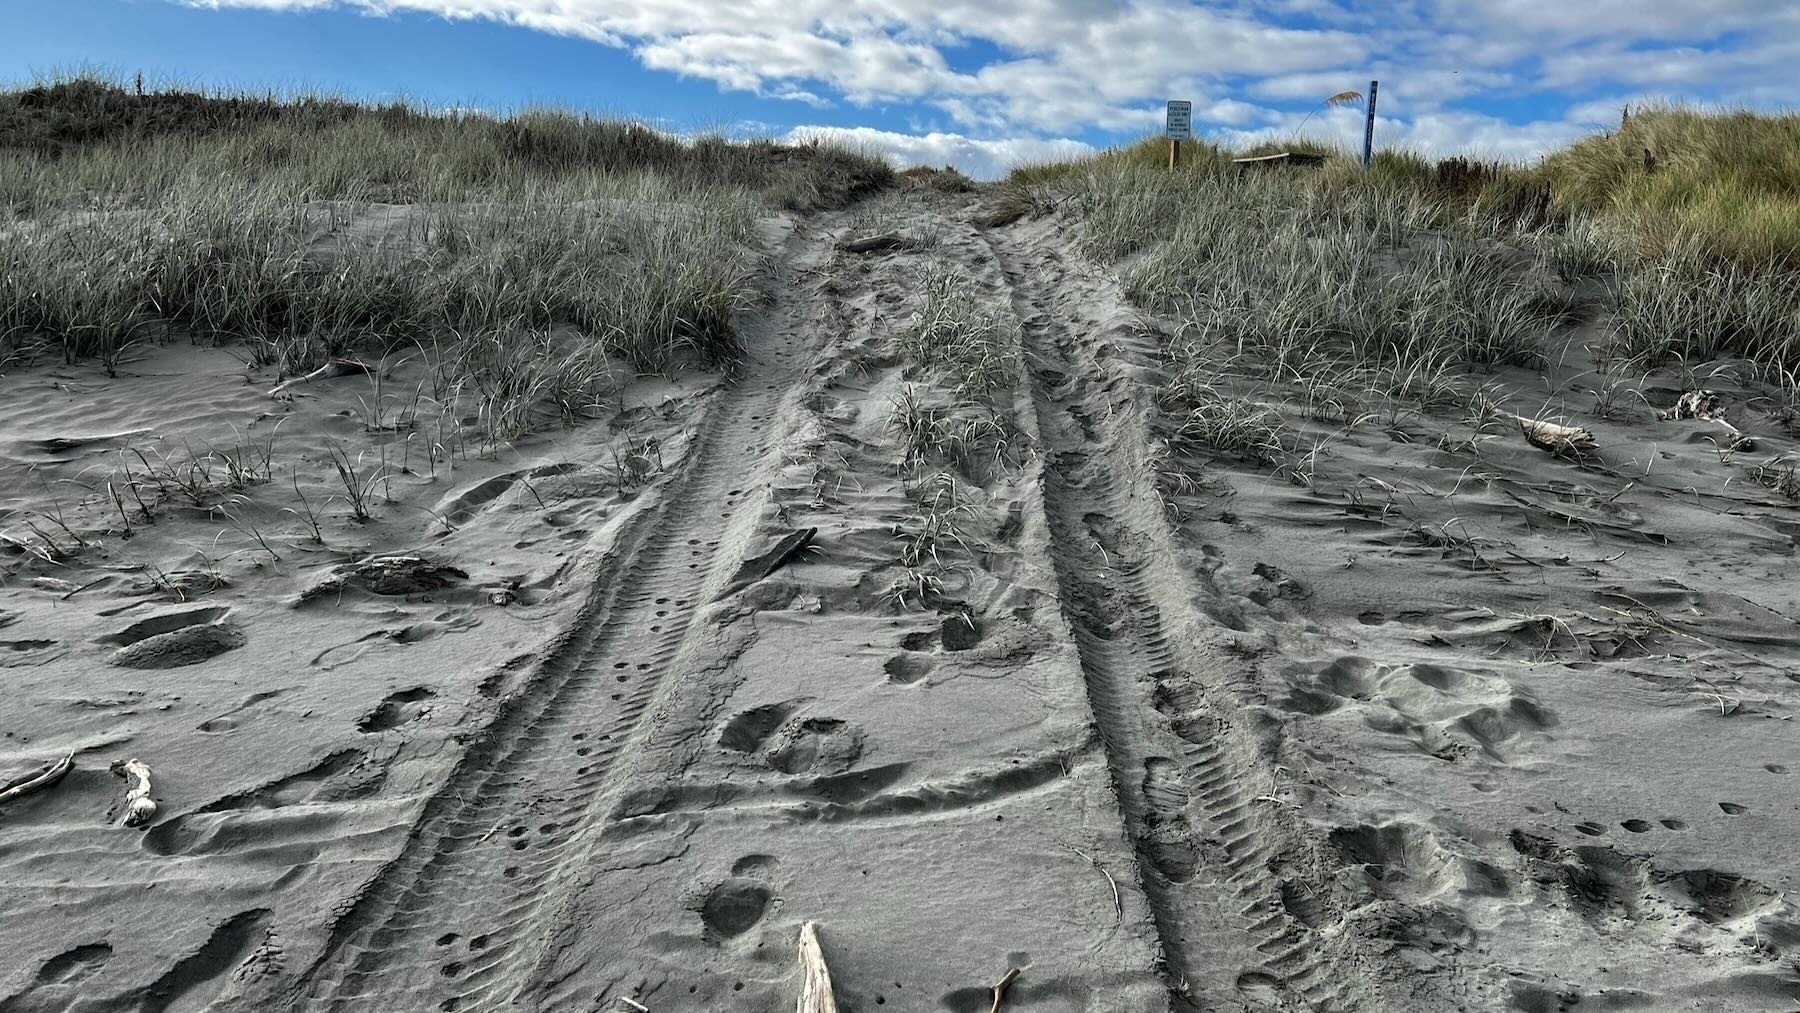 Tire tracks lead into the dunes and past the No Vehicles sign.  